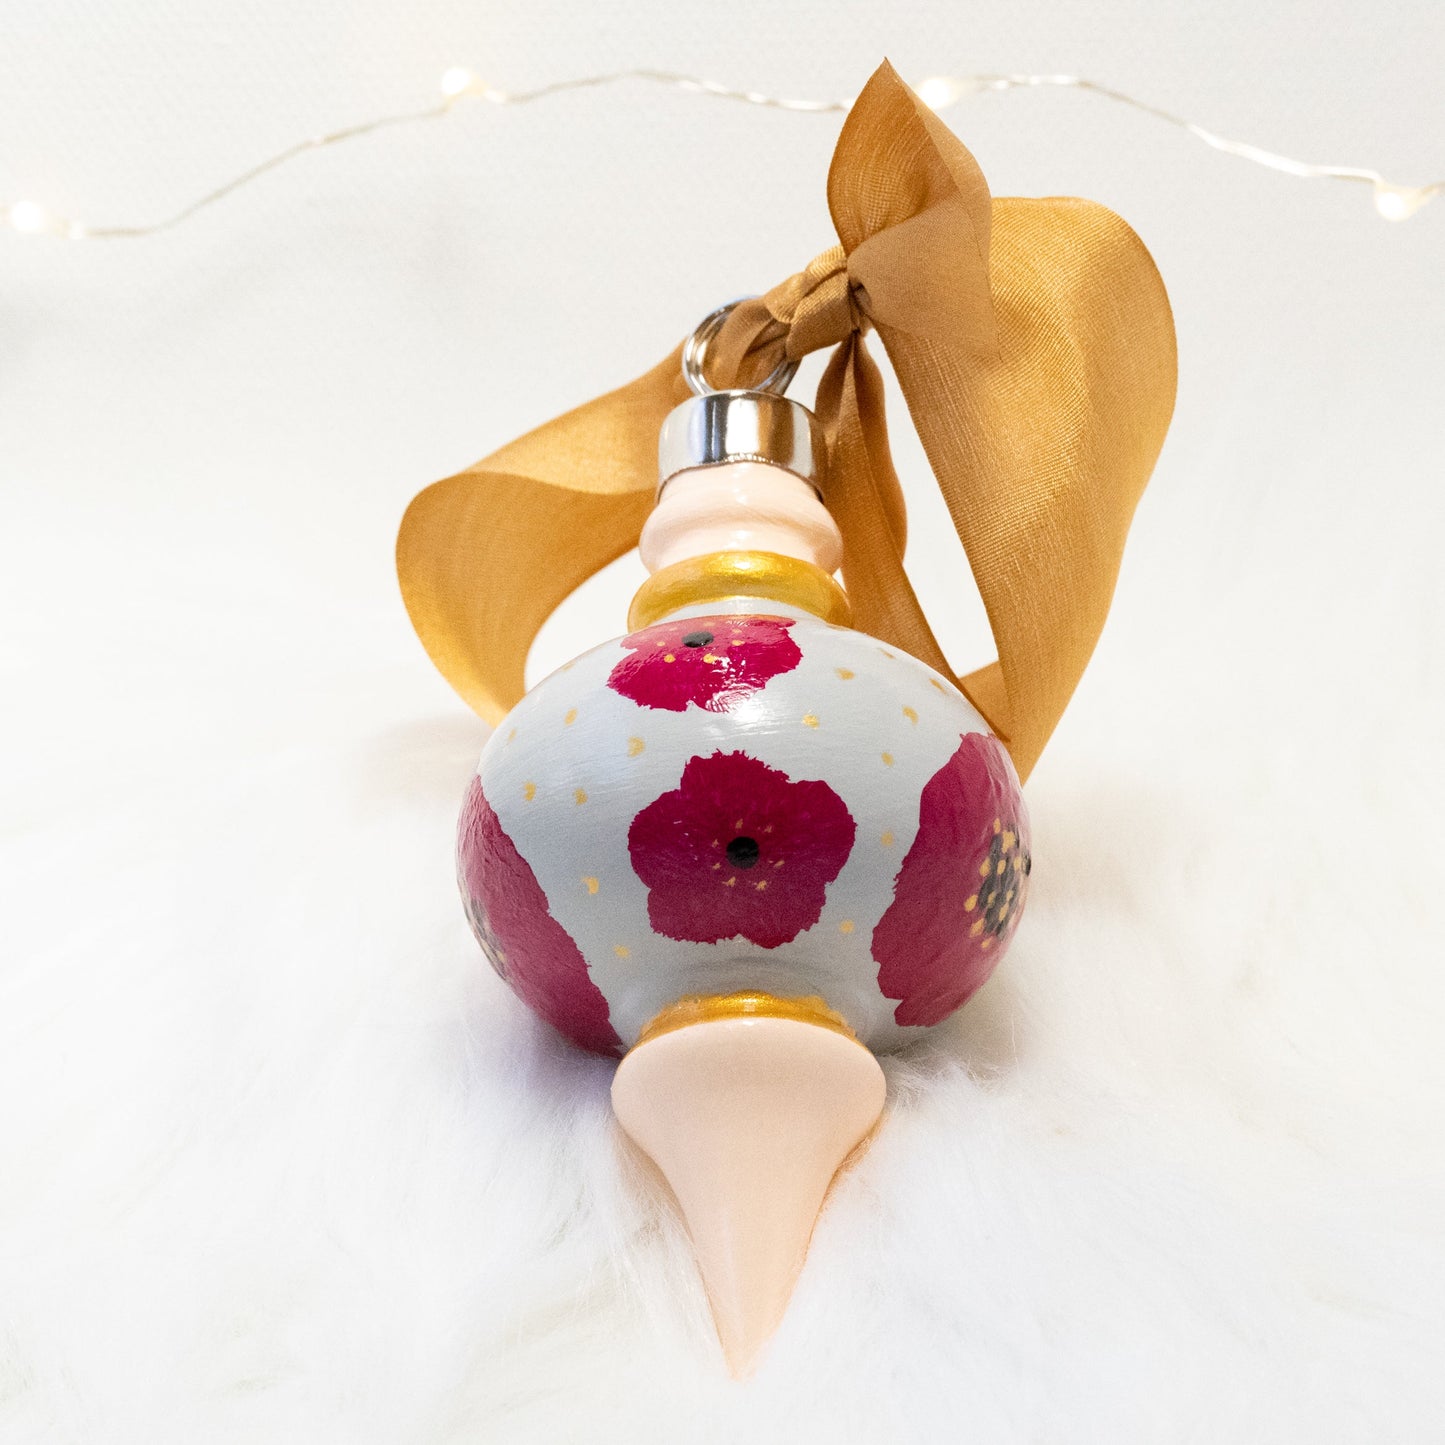 The Lulu Hand Painted Ornament features a light gray and peach base coat, rose violet flowers with gold polka dots and black and gold accents. Painted using fluid acrylic and acryla gouache paints. Displayed on white faux fur with fairy lights in the background.